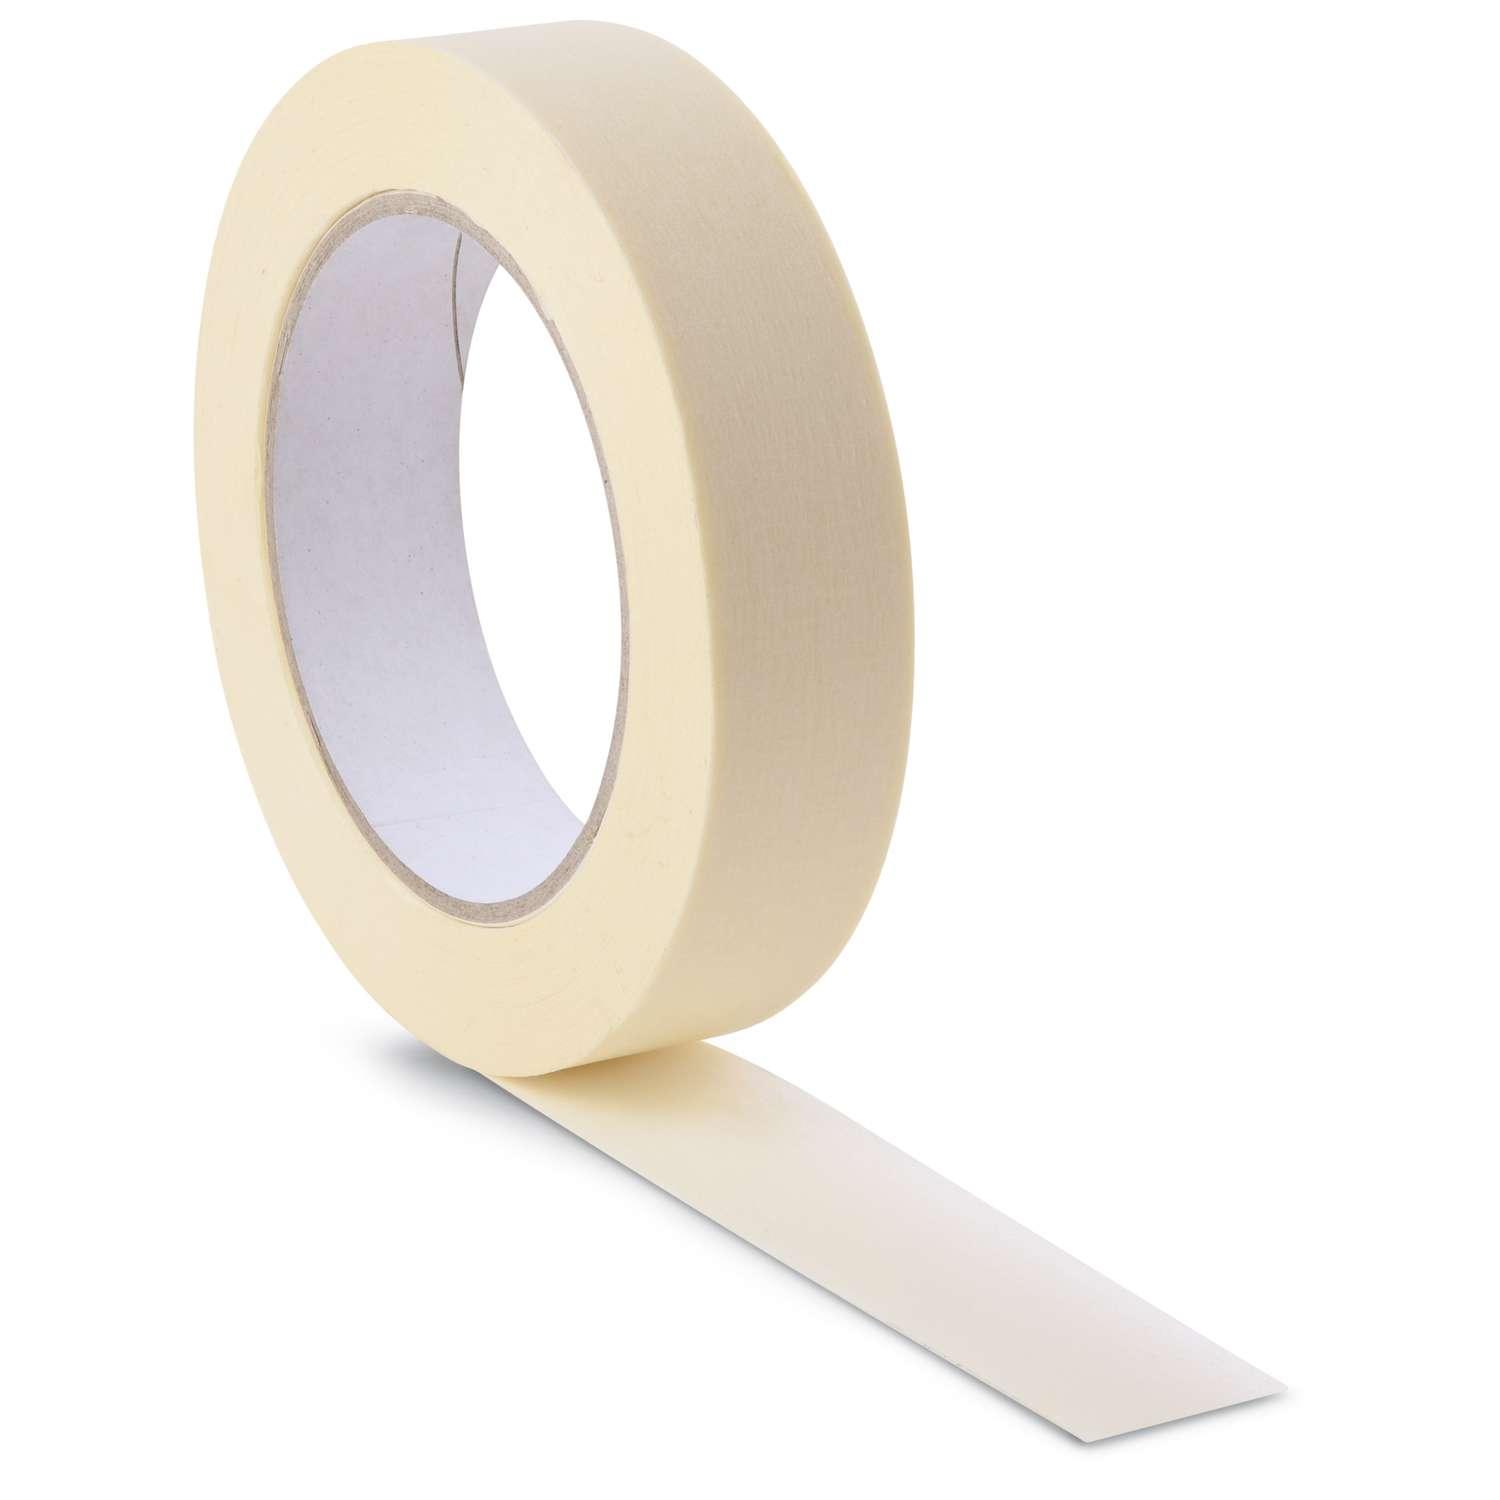 Alpha Masking Tape 1.9 x 30 cm - Karout Online -Karout Online Shopping In lebanon - Karout Express Delivery 